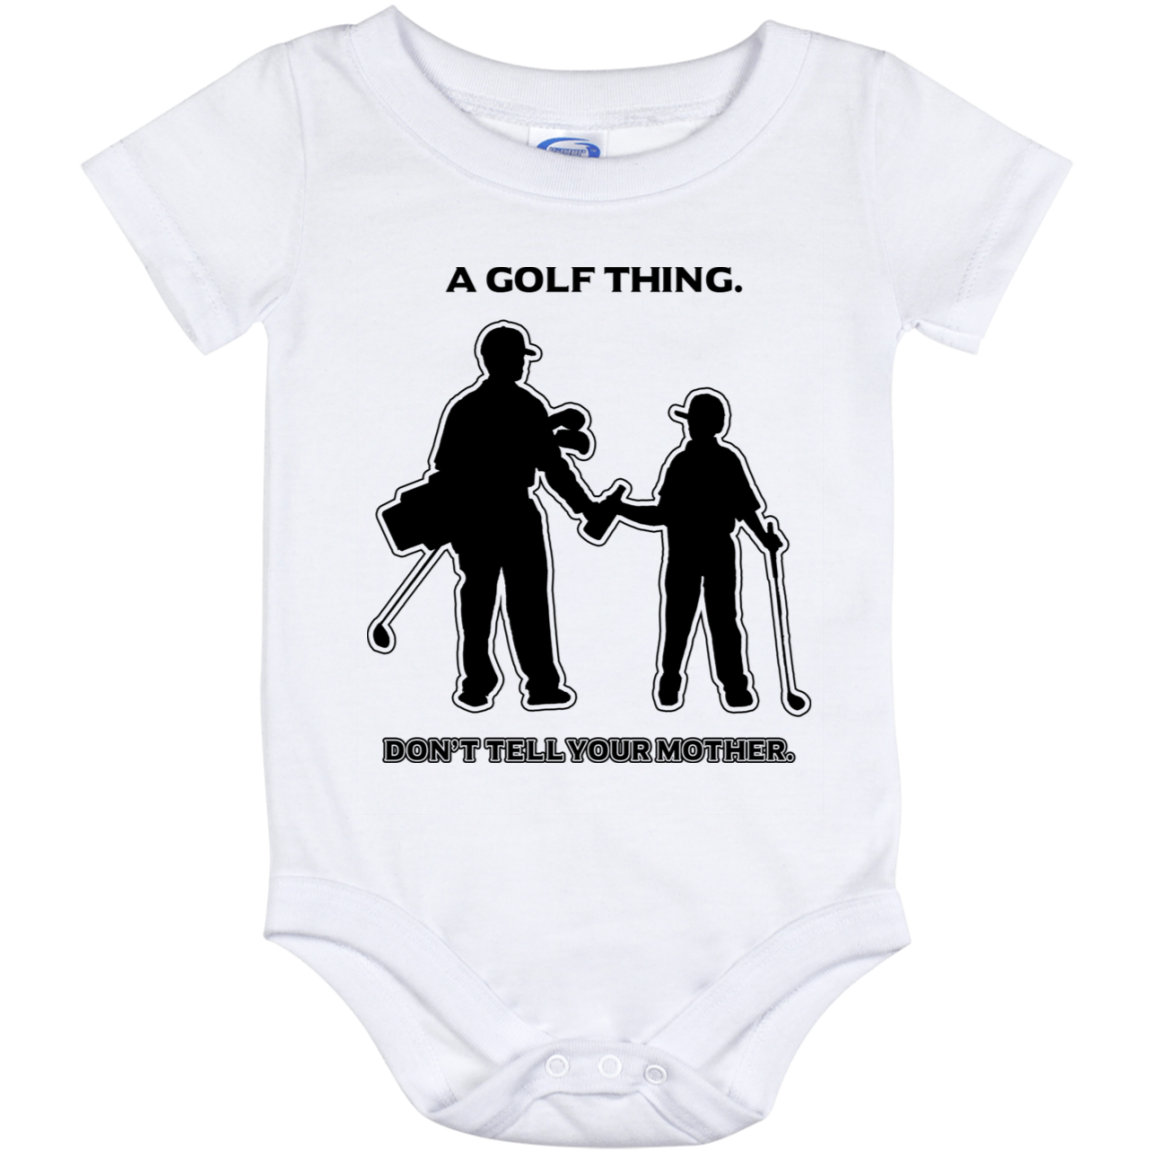 OPG Custom Design #7. Father and Son's First Beer. Don't Tell Your Mother. Baby Onesie 12 Month